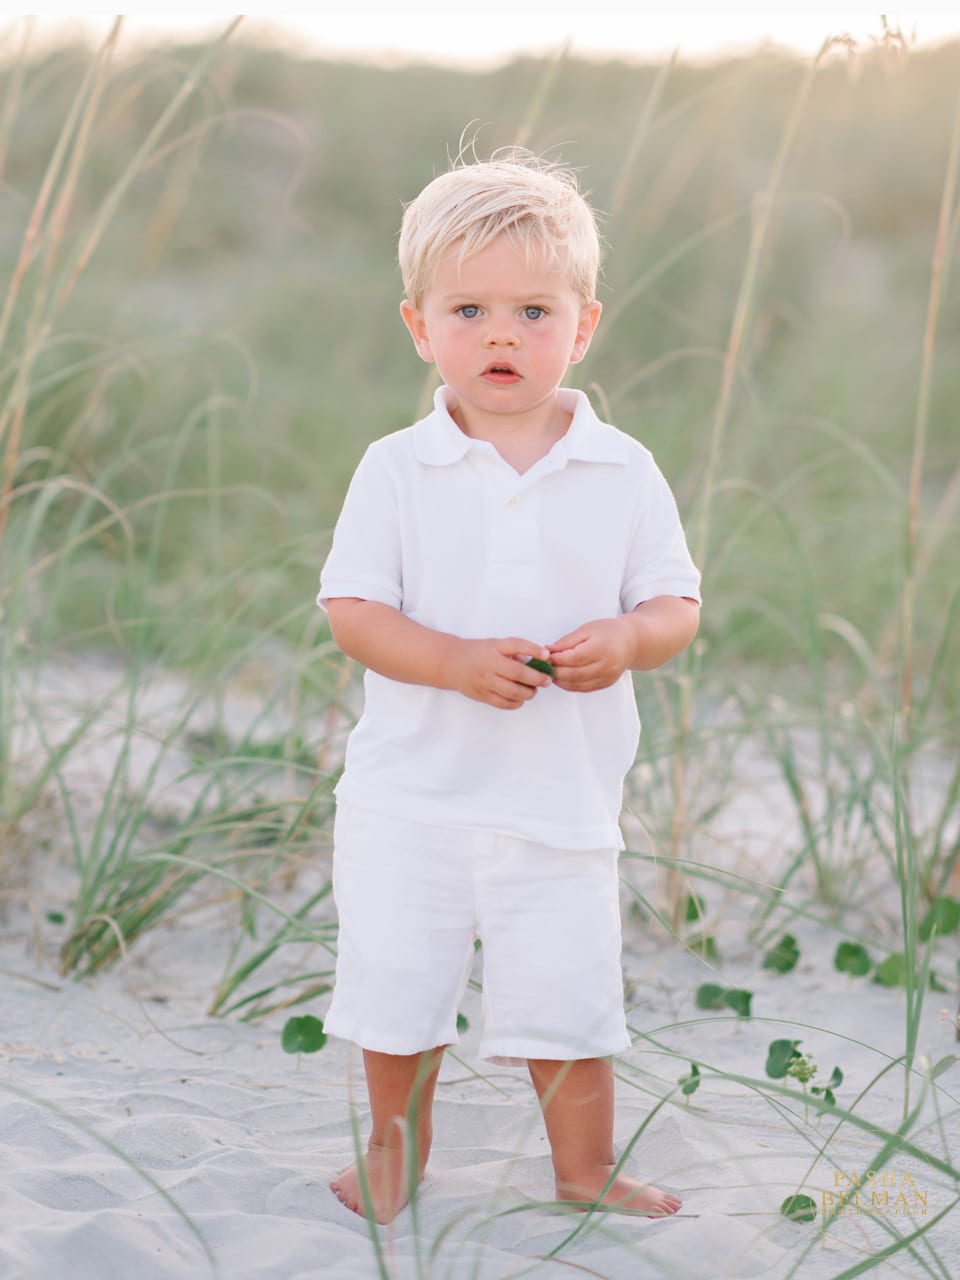 North Myrtle Beach Family Photographers - Family Beach Pictures in North Myrtle Beach